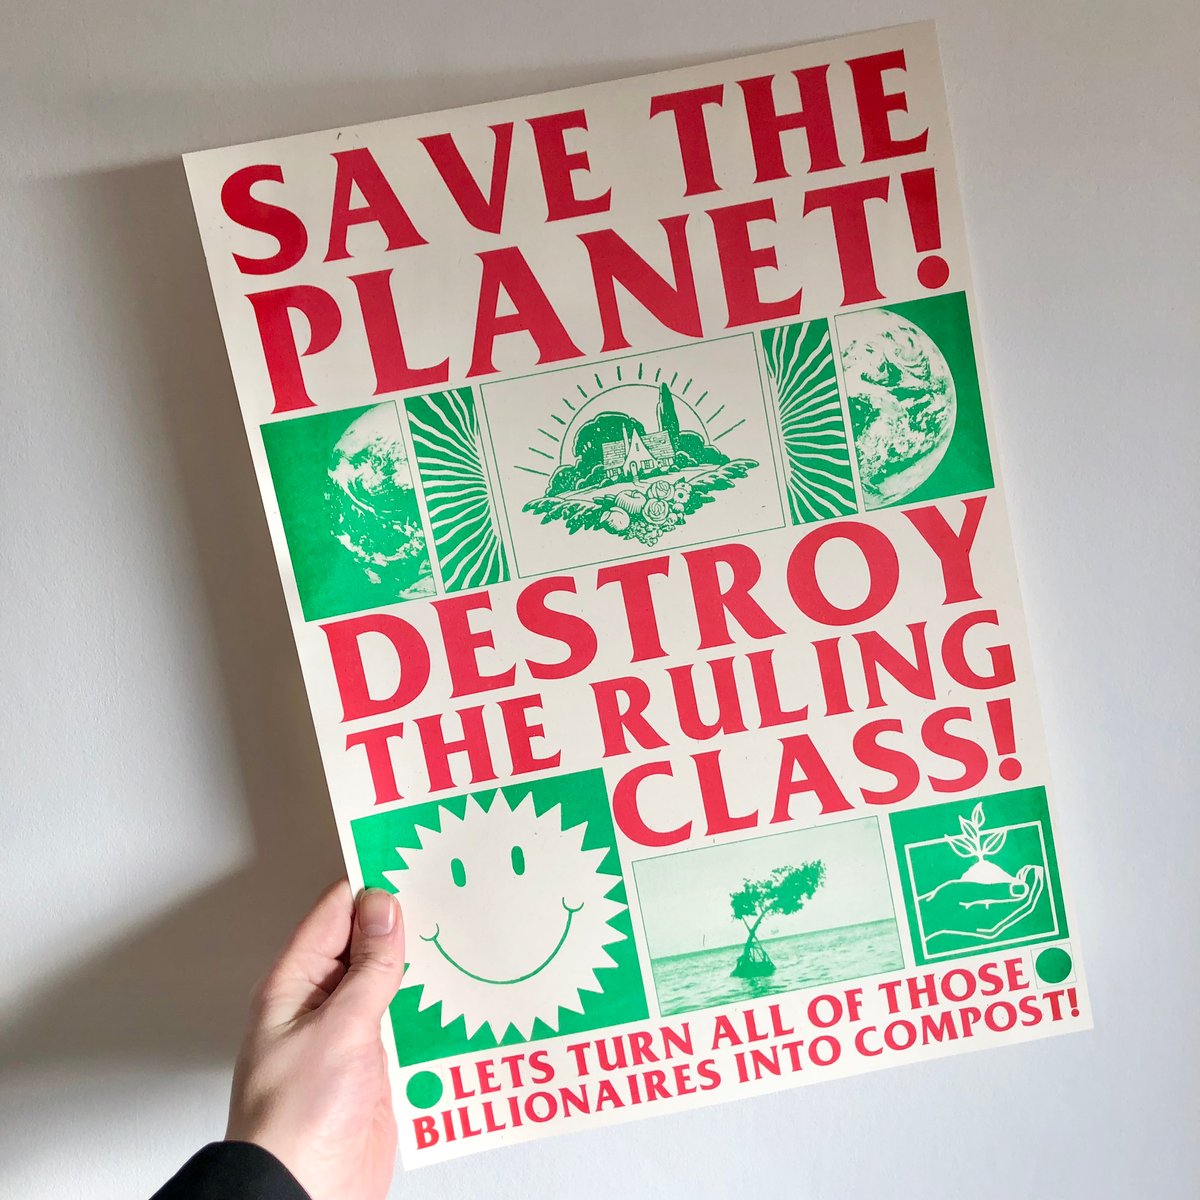 Image of Save the Planet! A3 Riso print